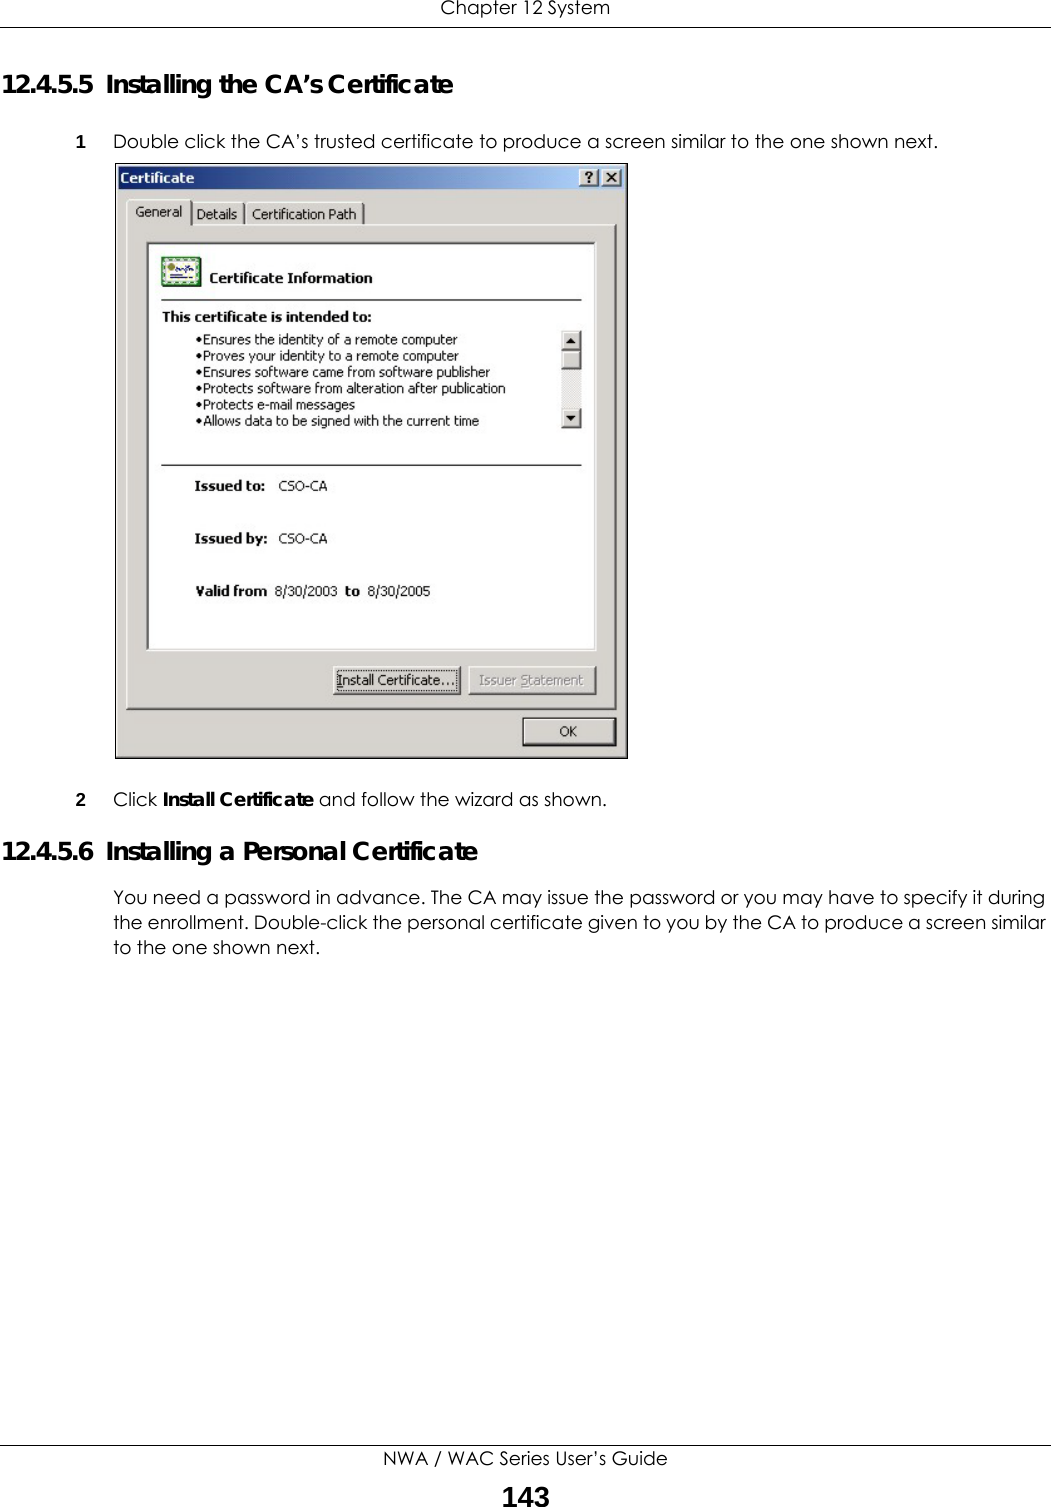 Chapter 12 SystemNWA / WAC Series User’s Guide14312.4.5.5  Installing the CA’s Certificate1Double click the CA’s trusted certificate to produce a screen similar to the one shown next.2Click Install Certificate and follow the wizard as shown.12.4.5.6  Installing a Personal CertificateYou need a password in advance. The CA may issue the password or you may have to specify it during the enrollment. Double-click the personal certificate given to you by the CA to produce a screen similar to the one shown next.